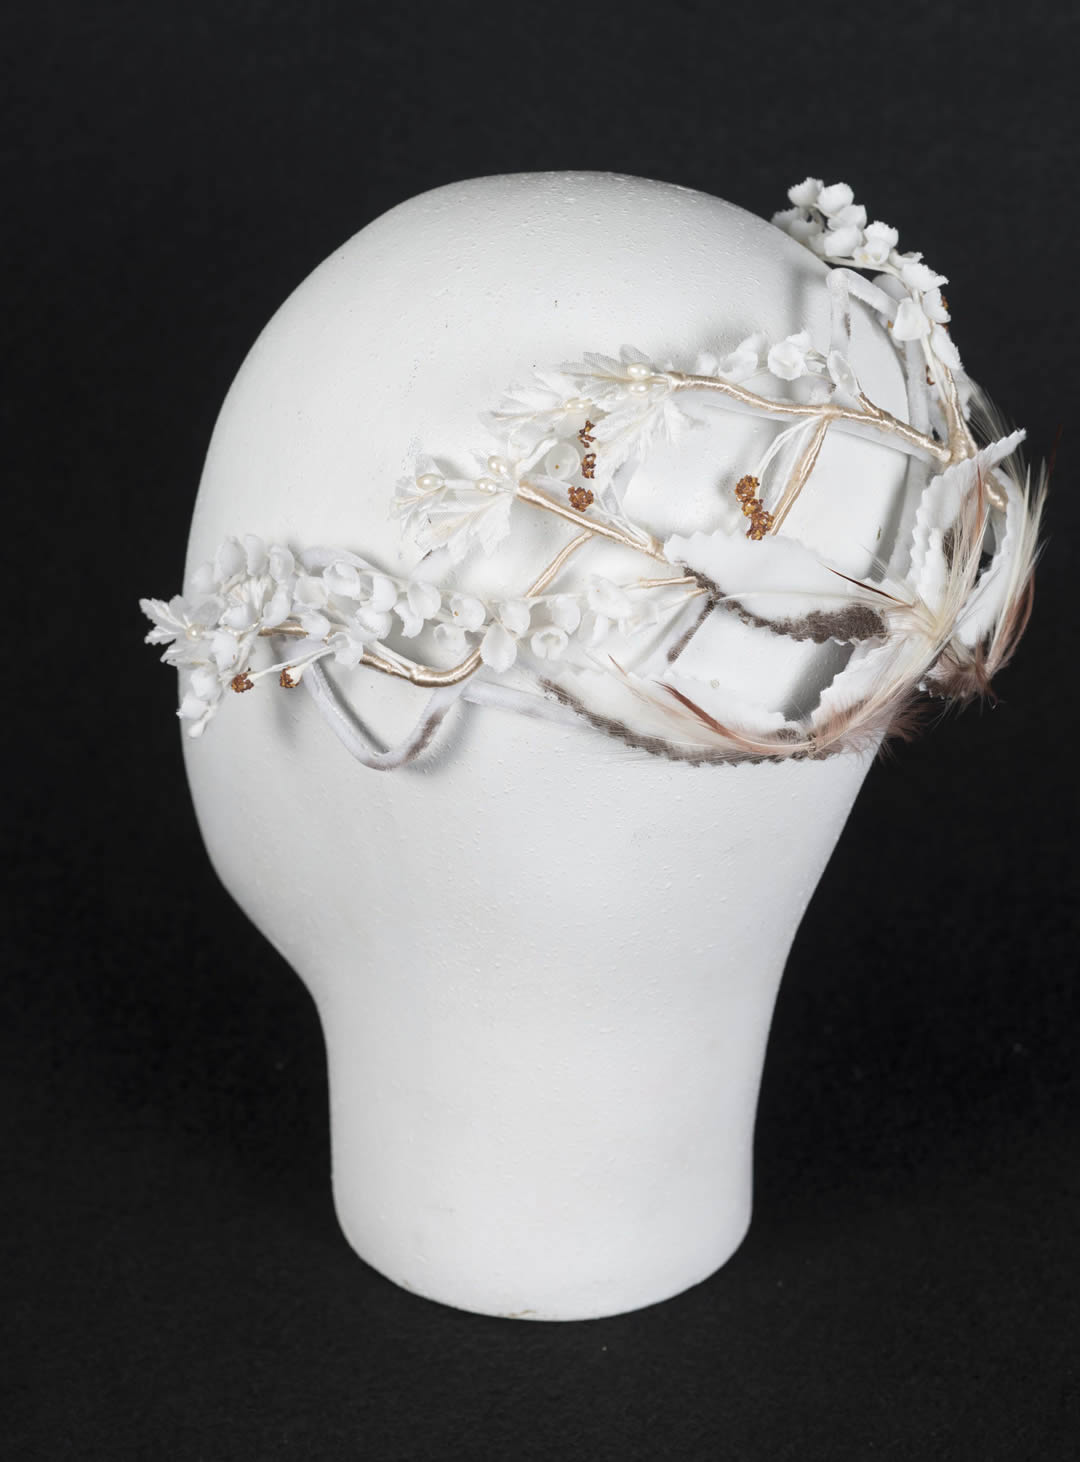 Wired fascinator with flowers, stamens, velvet leaves and bird of paradise feathers